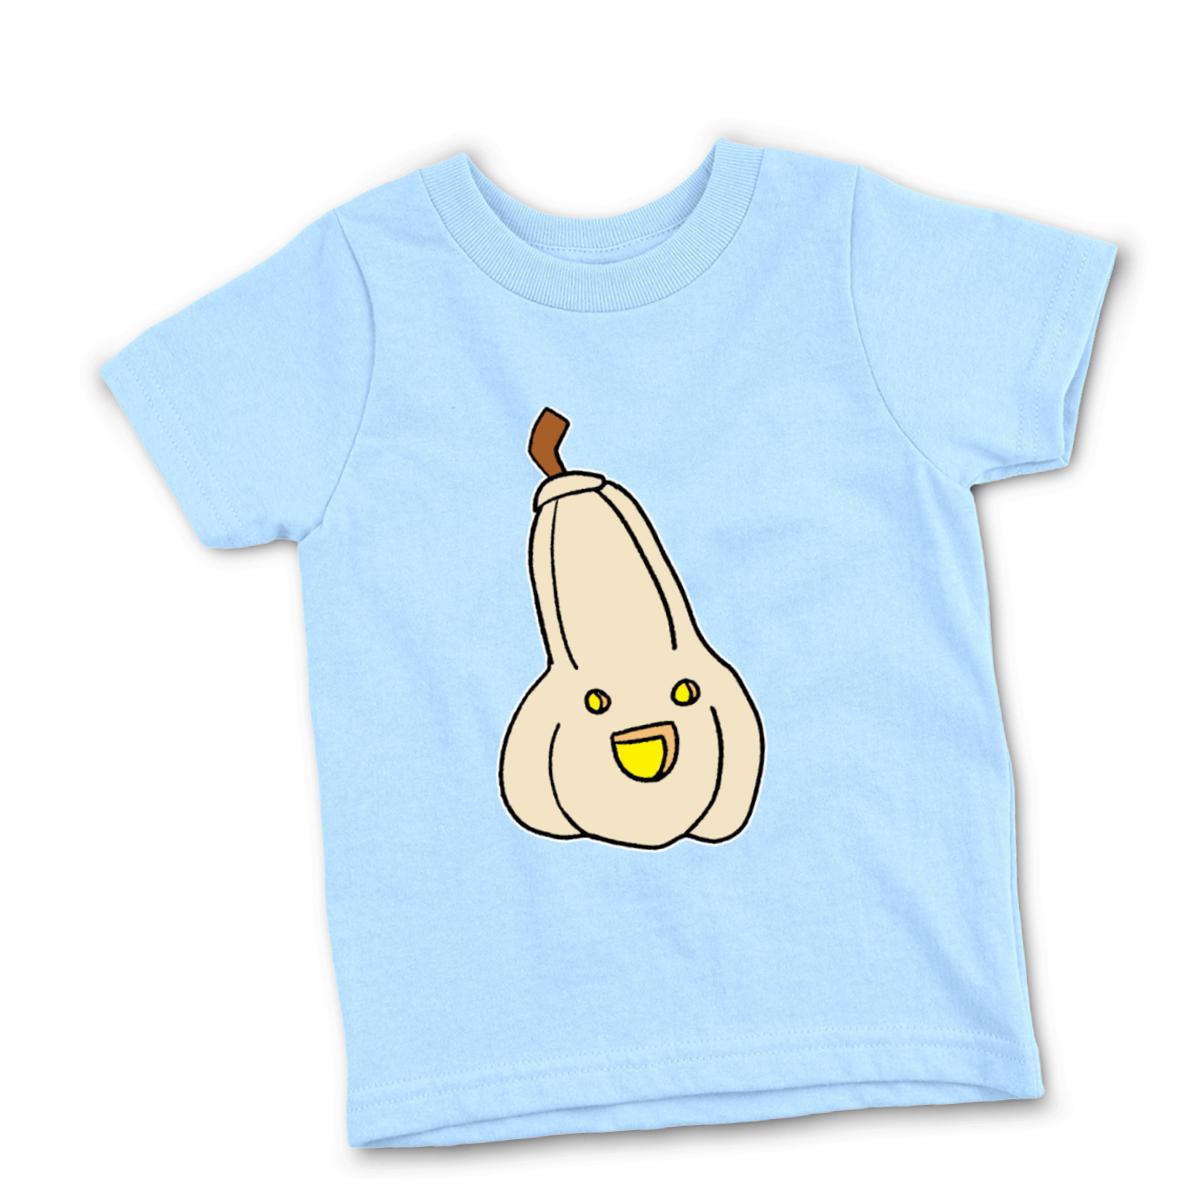 The New Guy Kid's Tee Small light-blue